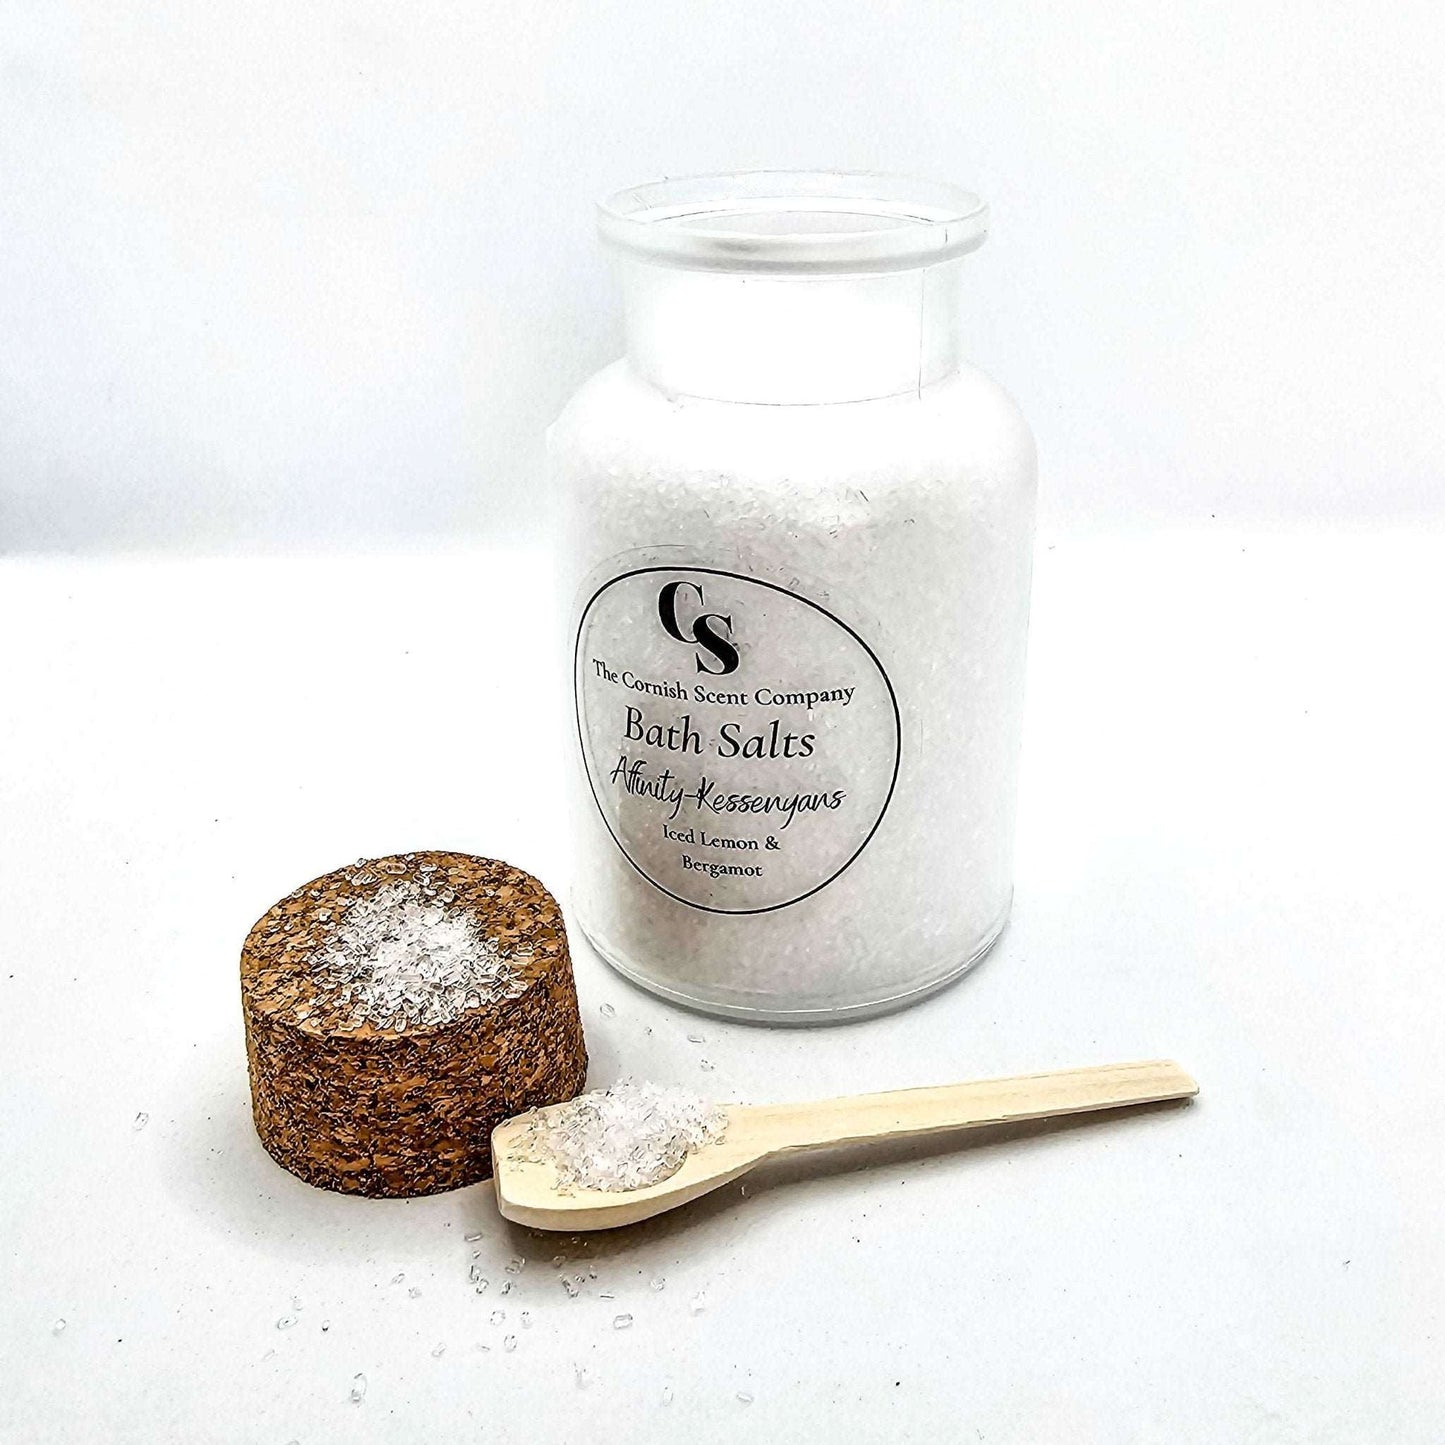 Soothing bath salts - The Cornish Scent Company